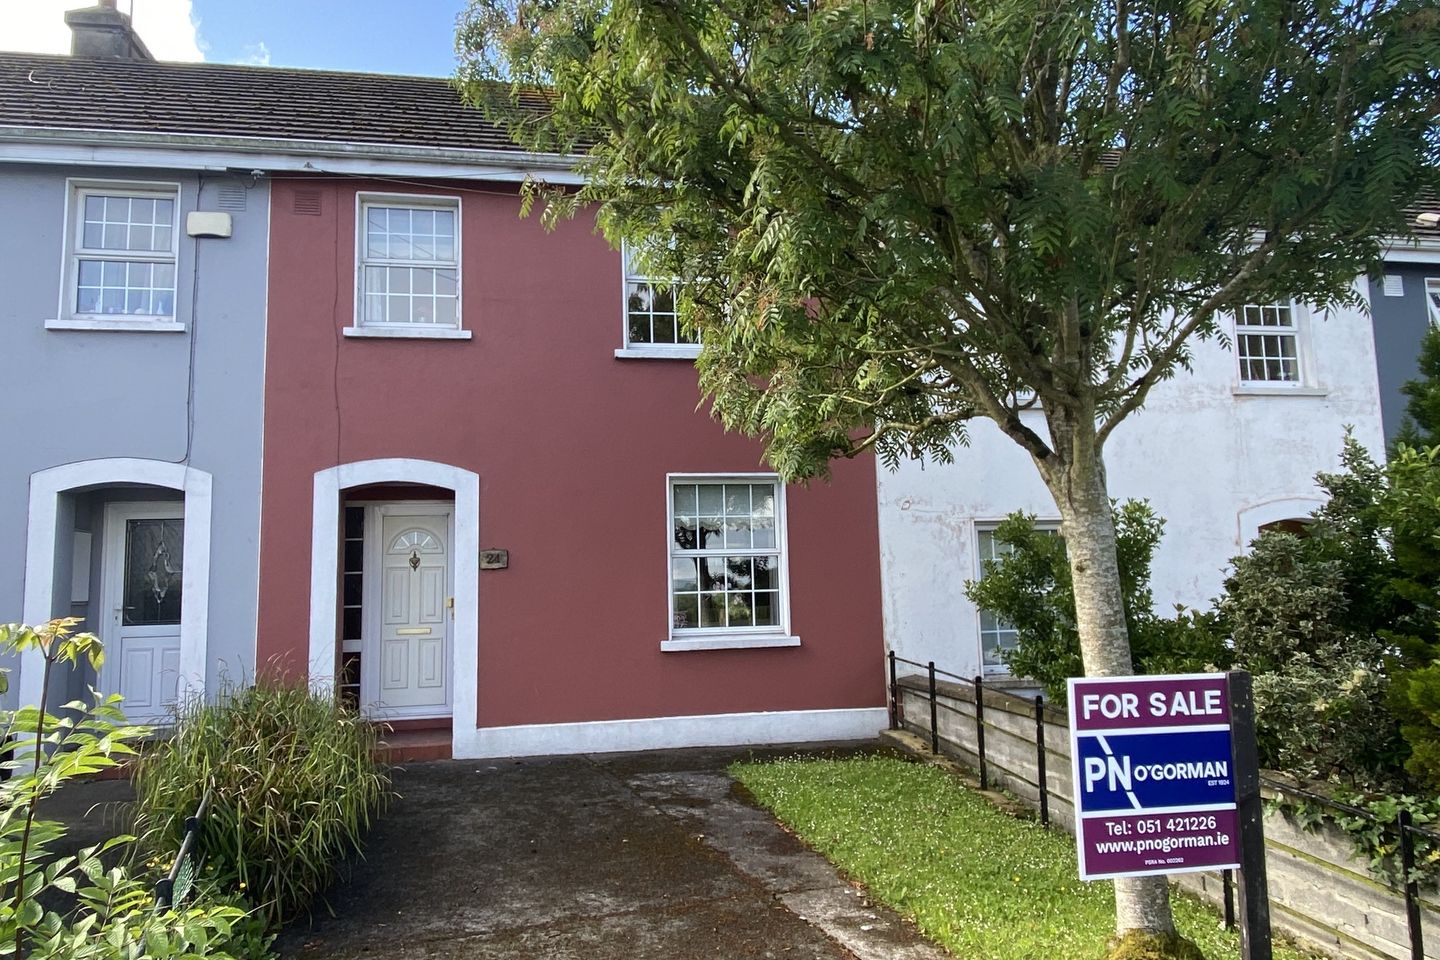 24 Barrow View Heights, New Ross, Co. Wexford